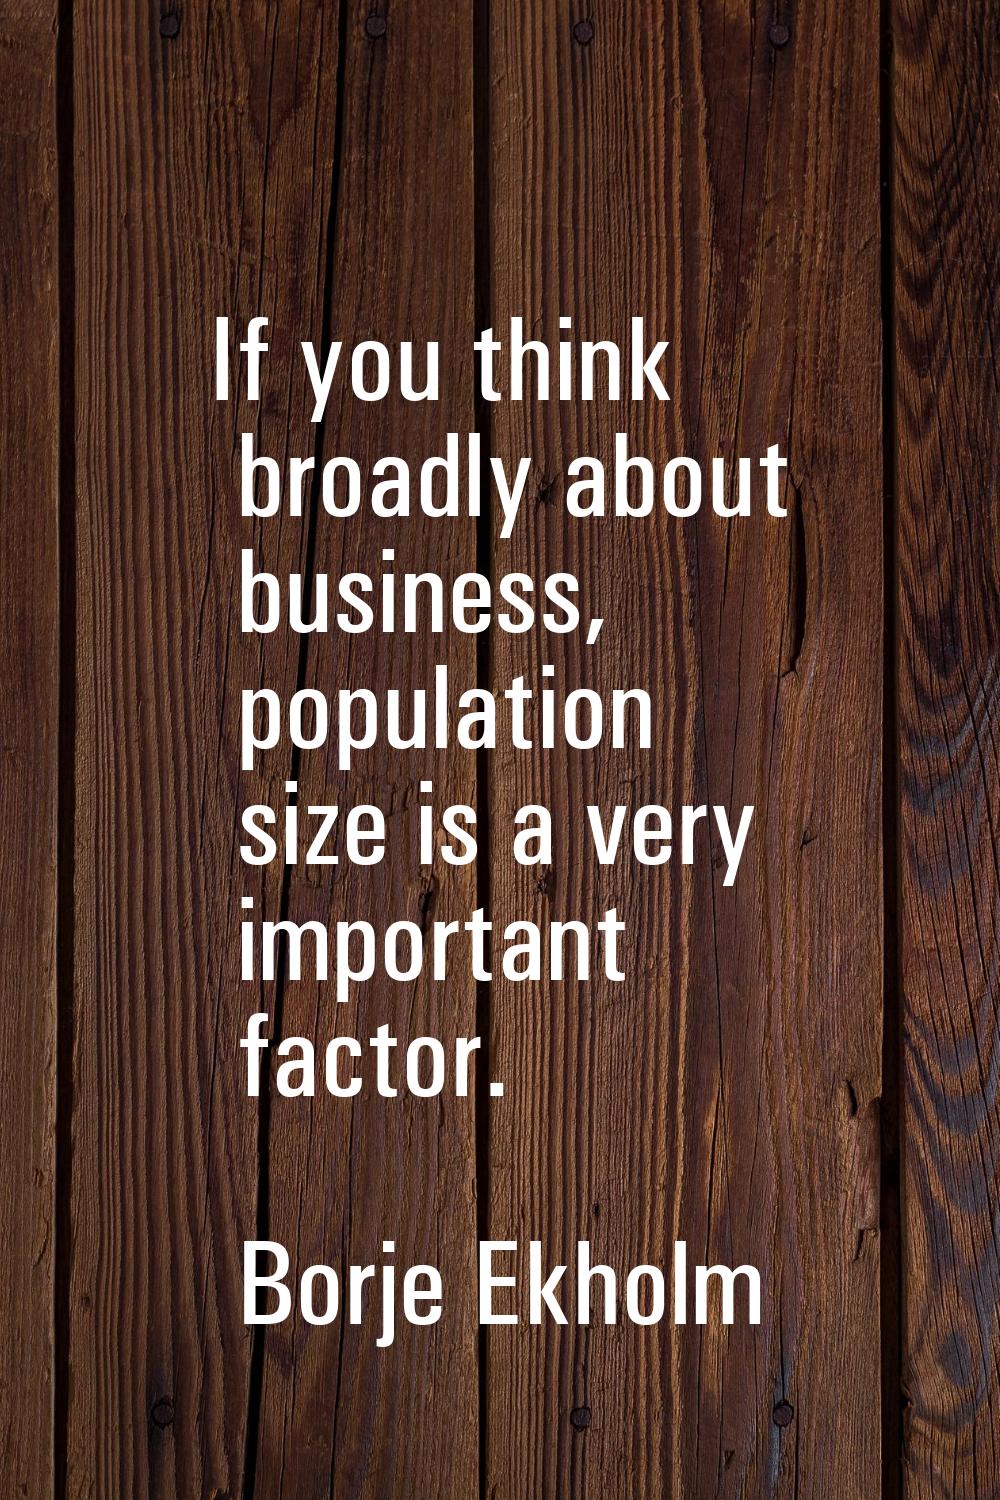 If you think broadly about business, population size is a very important factor.